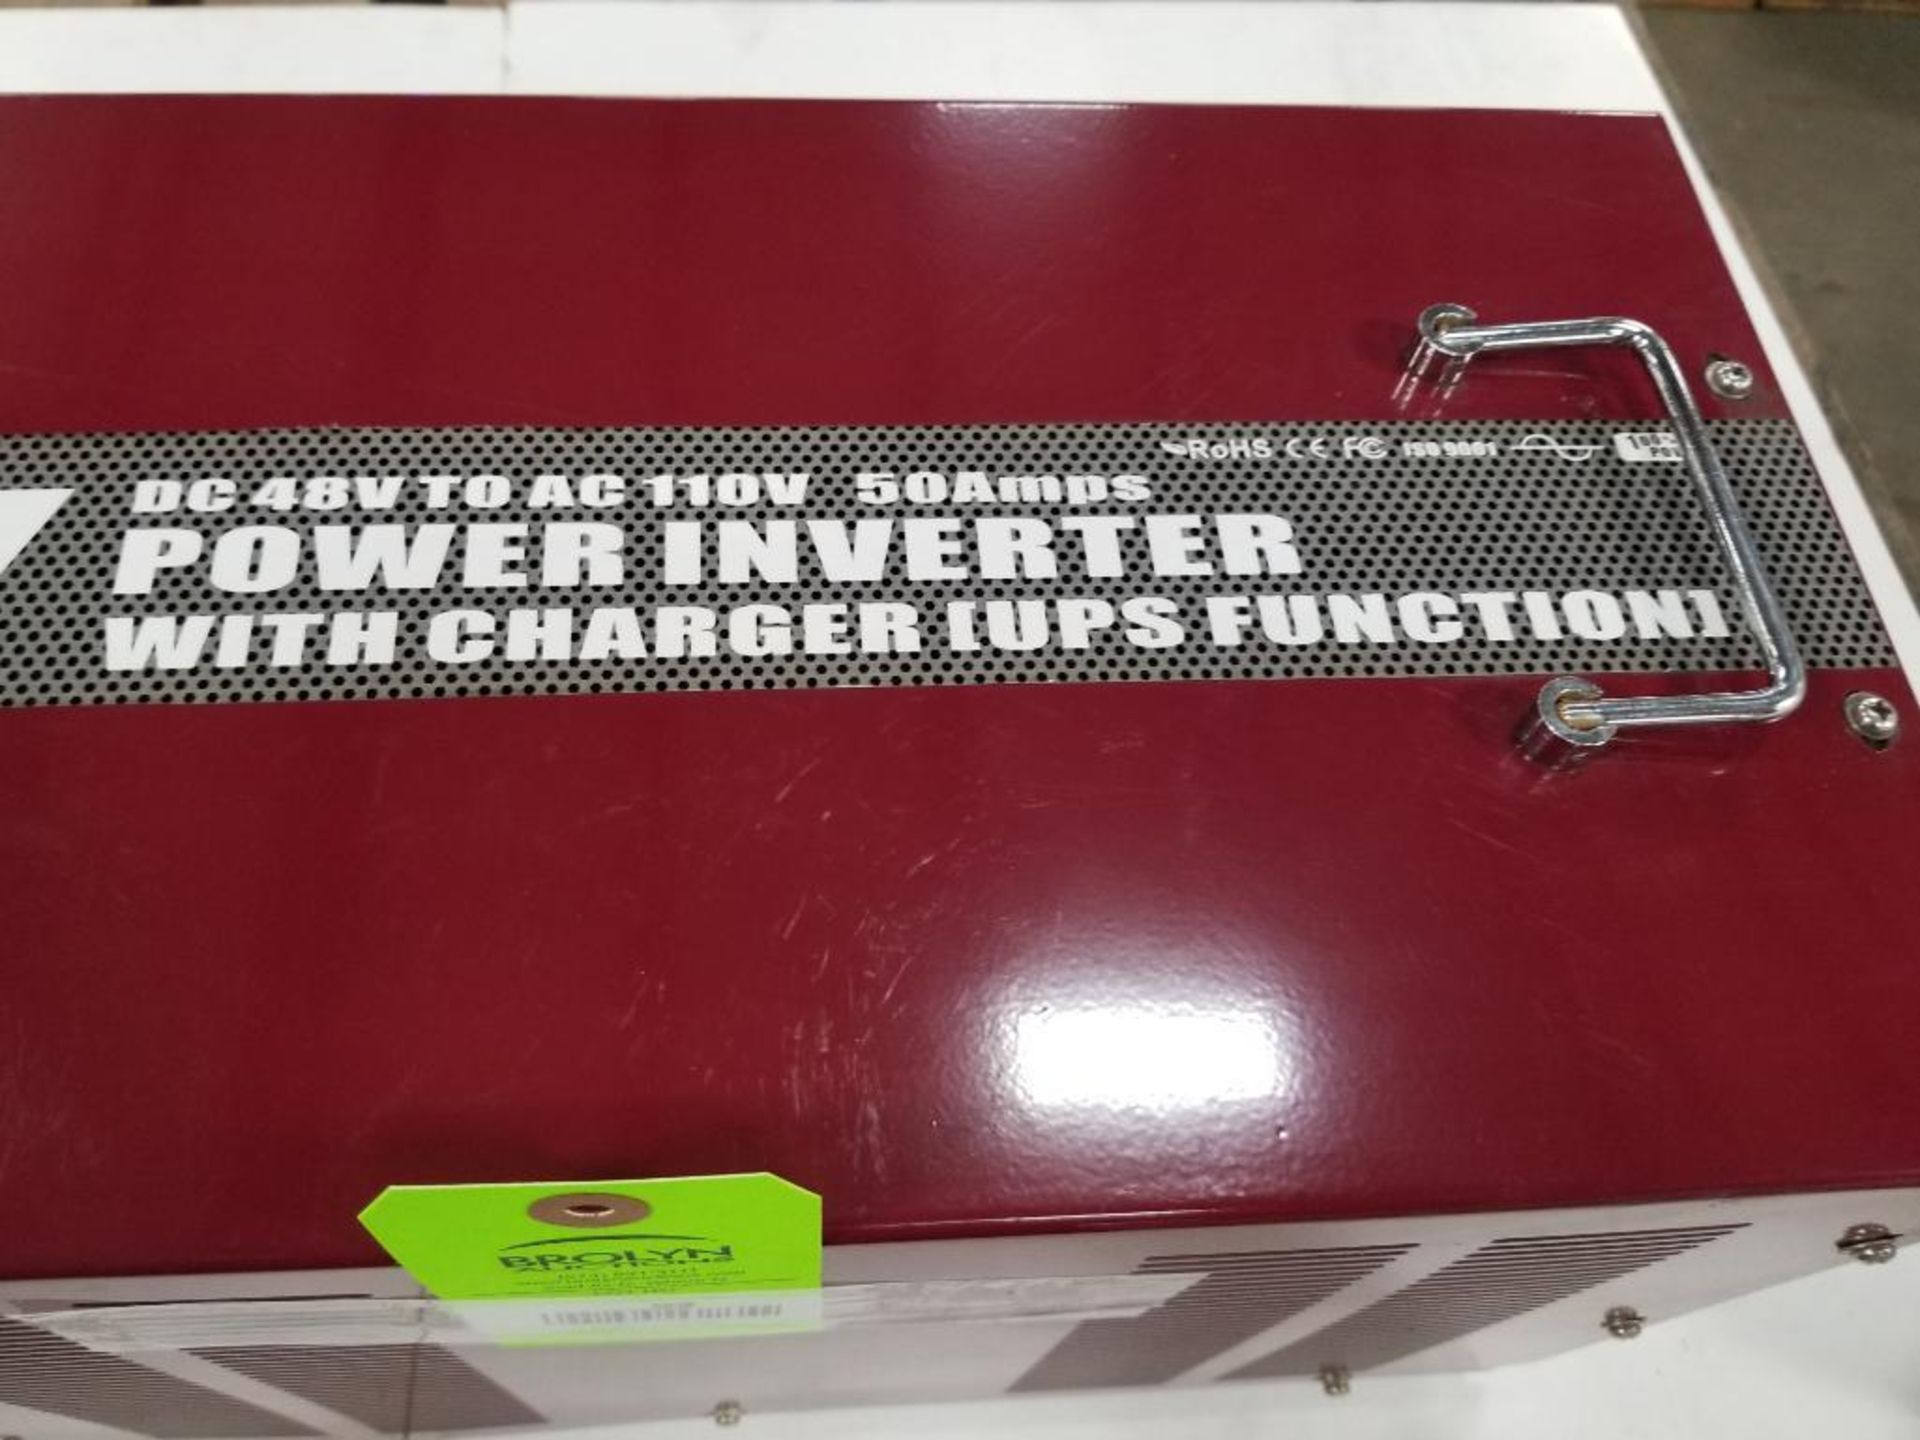 Jergoo 6000W power inverter with charger. New no box. - Image 3 of 7